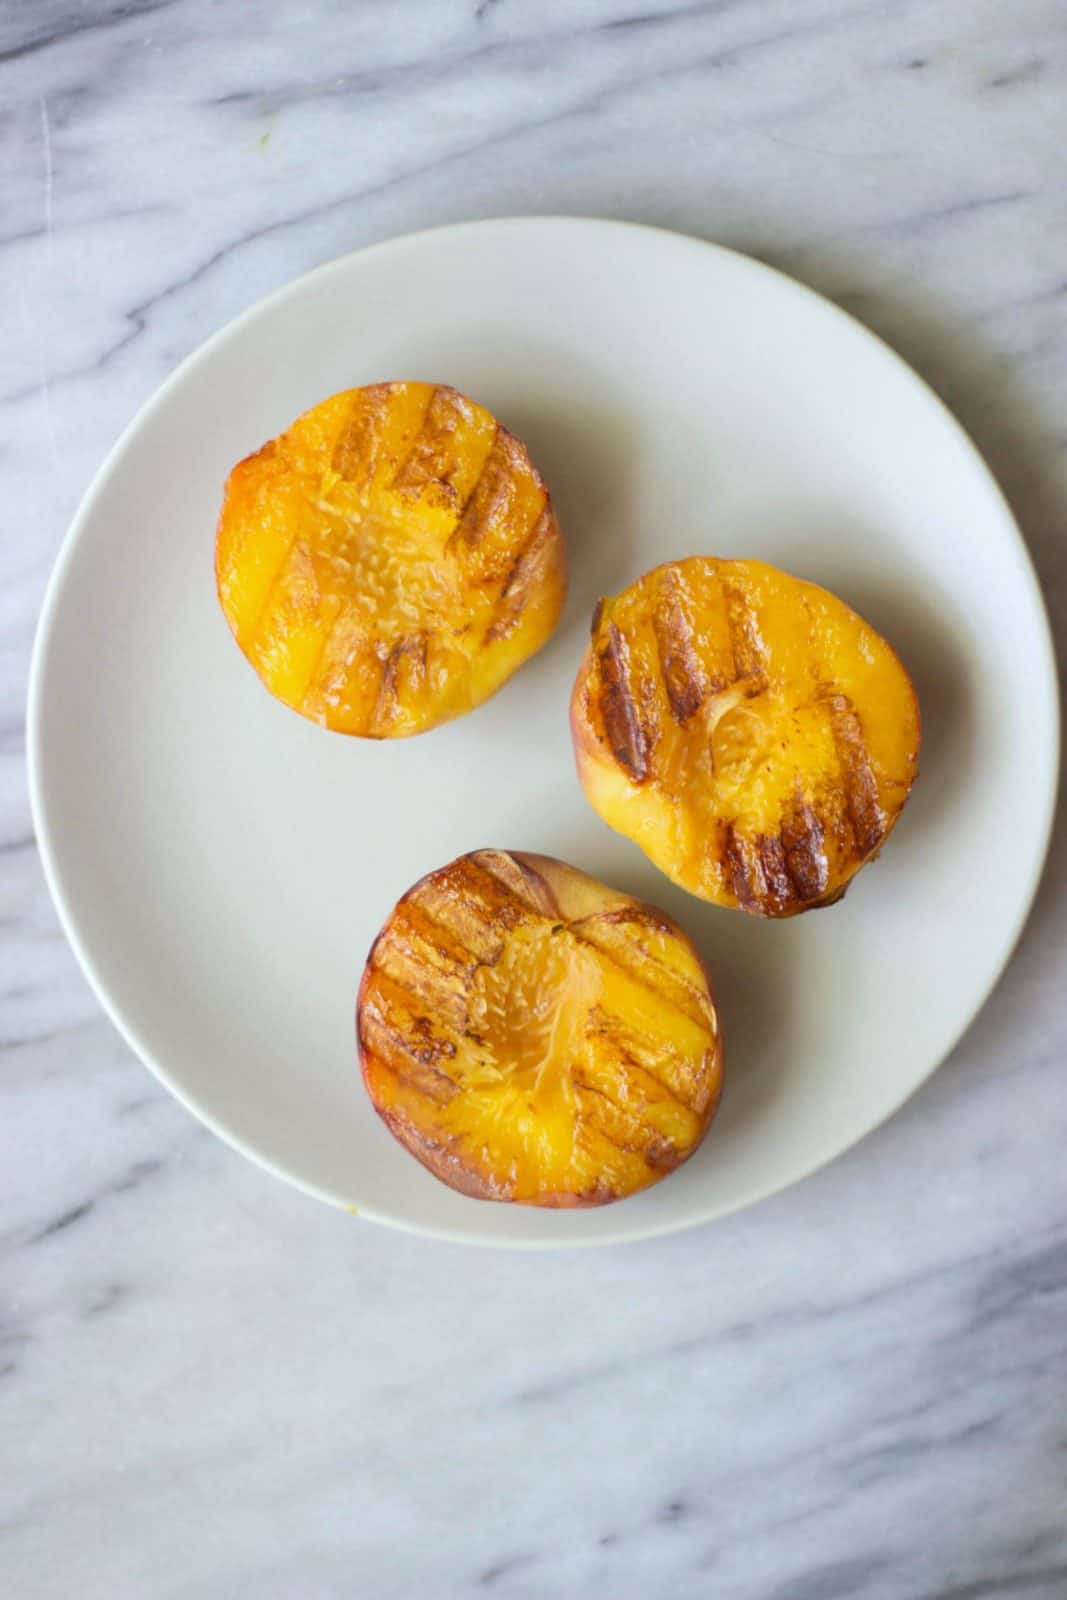 Grilled peaches on a white plate.